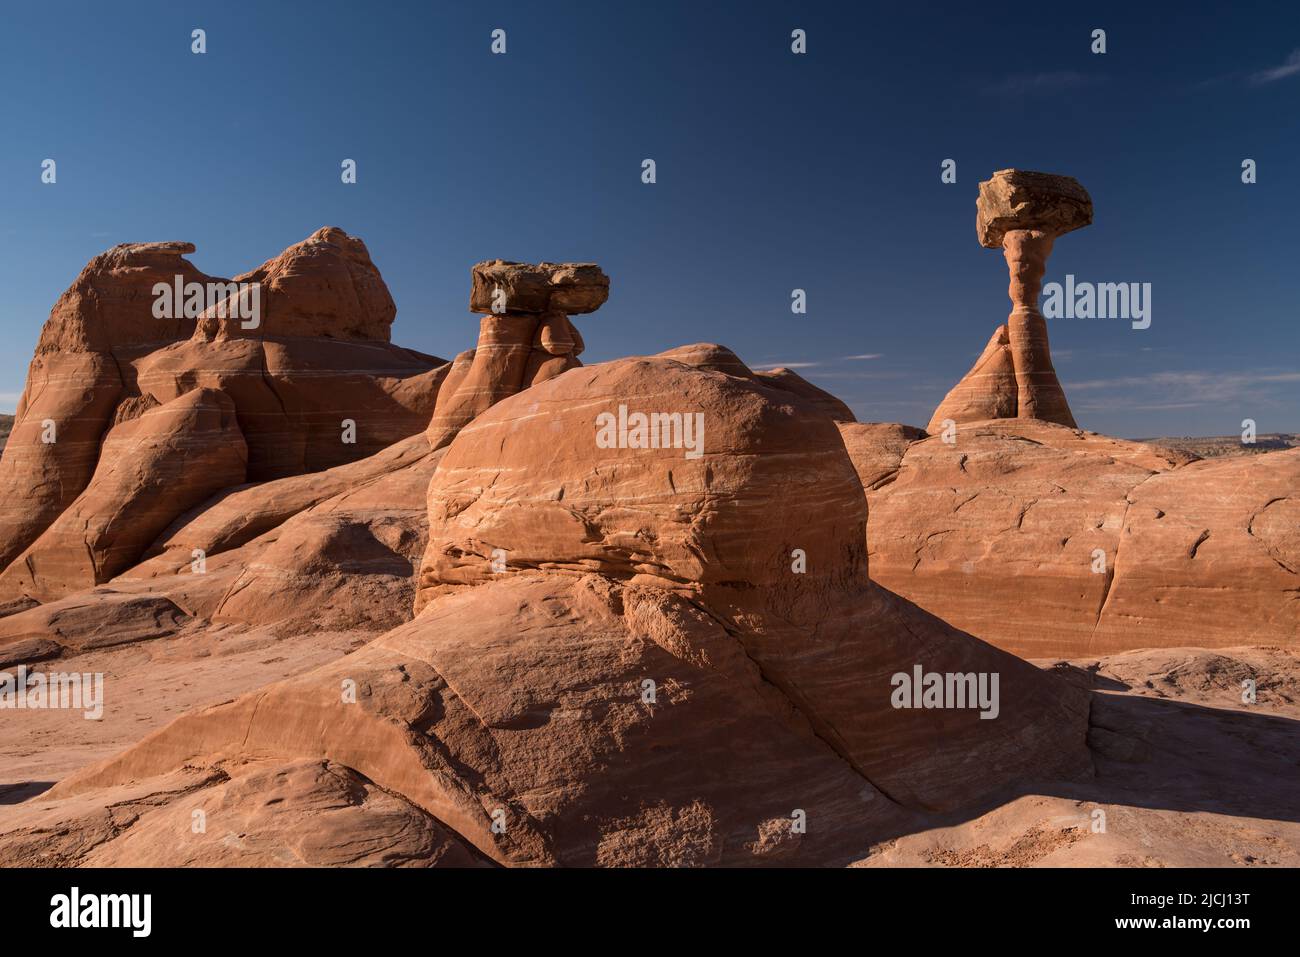 Toadstool rock formations near Kanab, Ut. USA. These unique formations are caused by erosion of soft stone underneath harder rock. Stock Photo